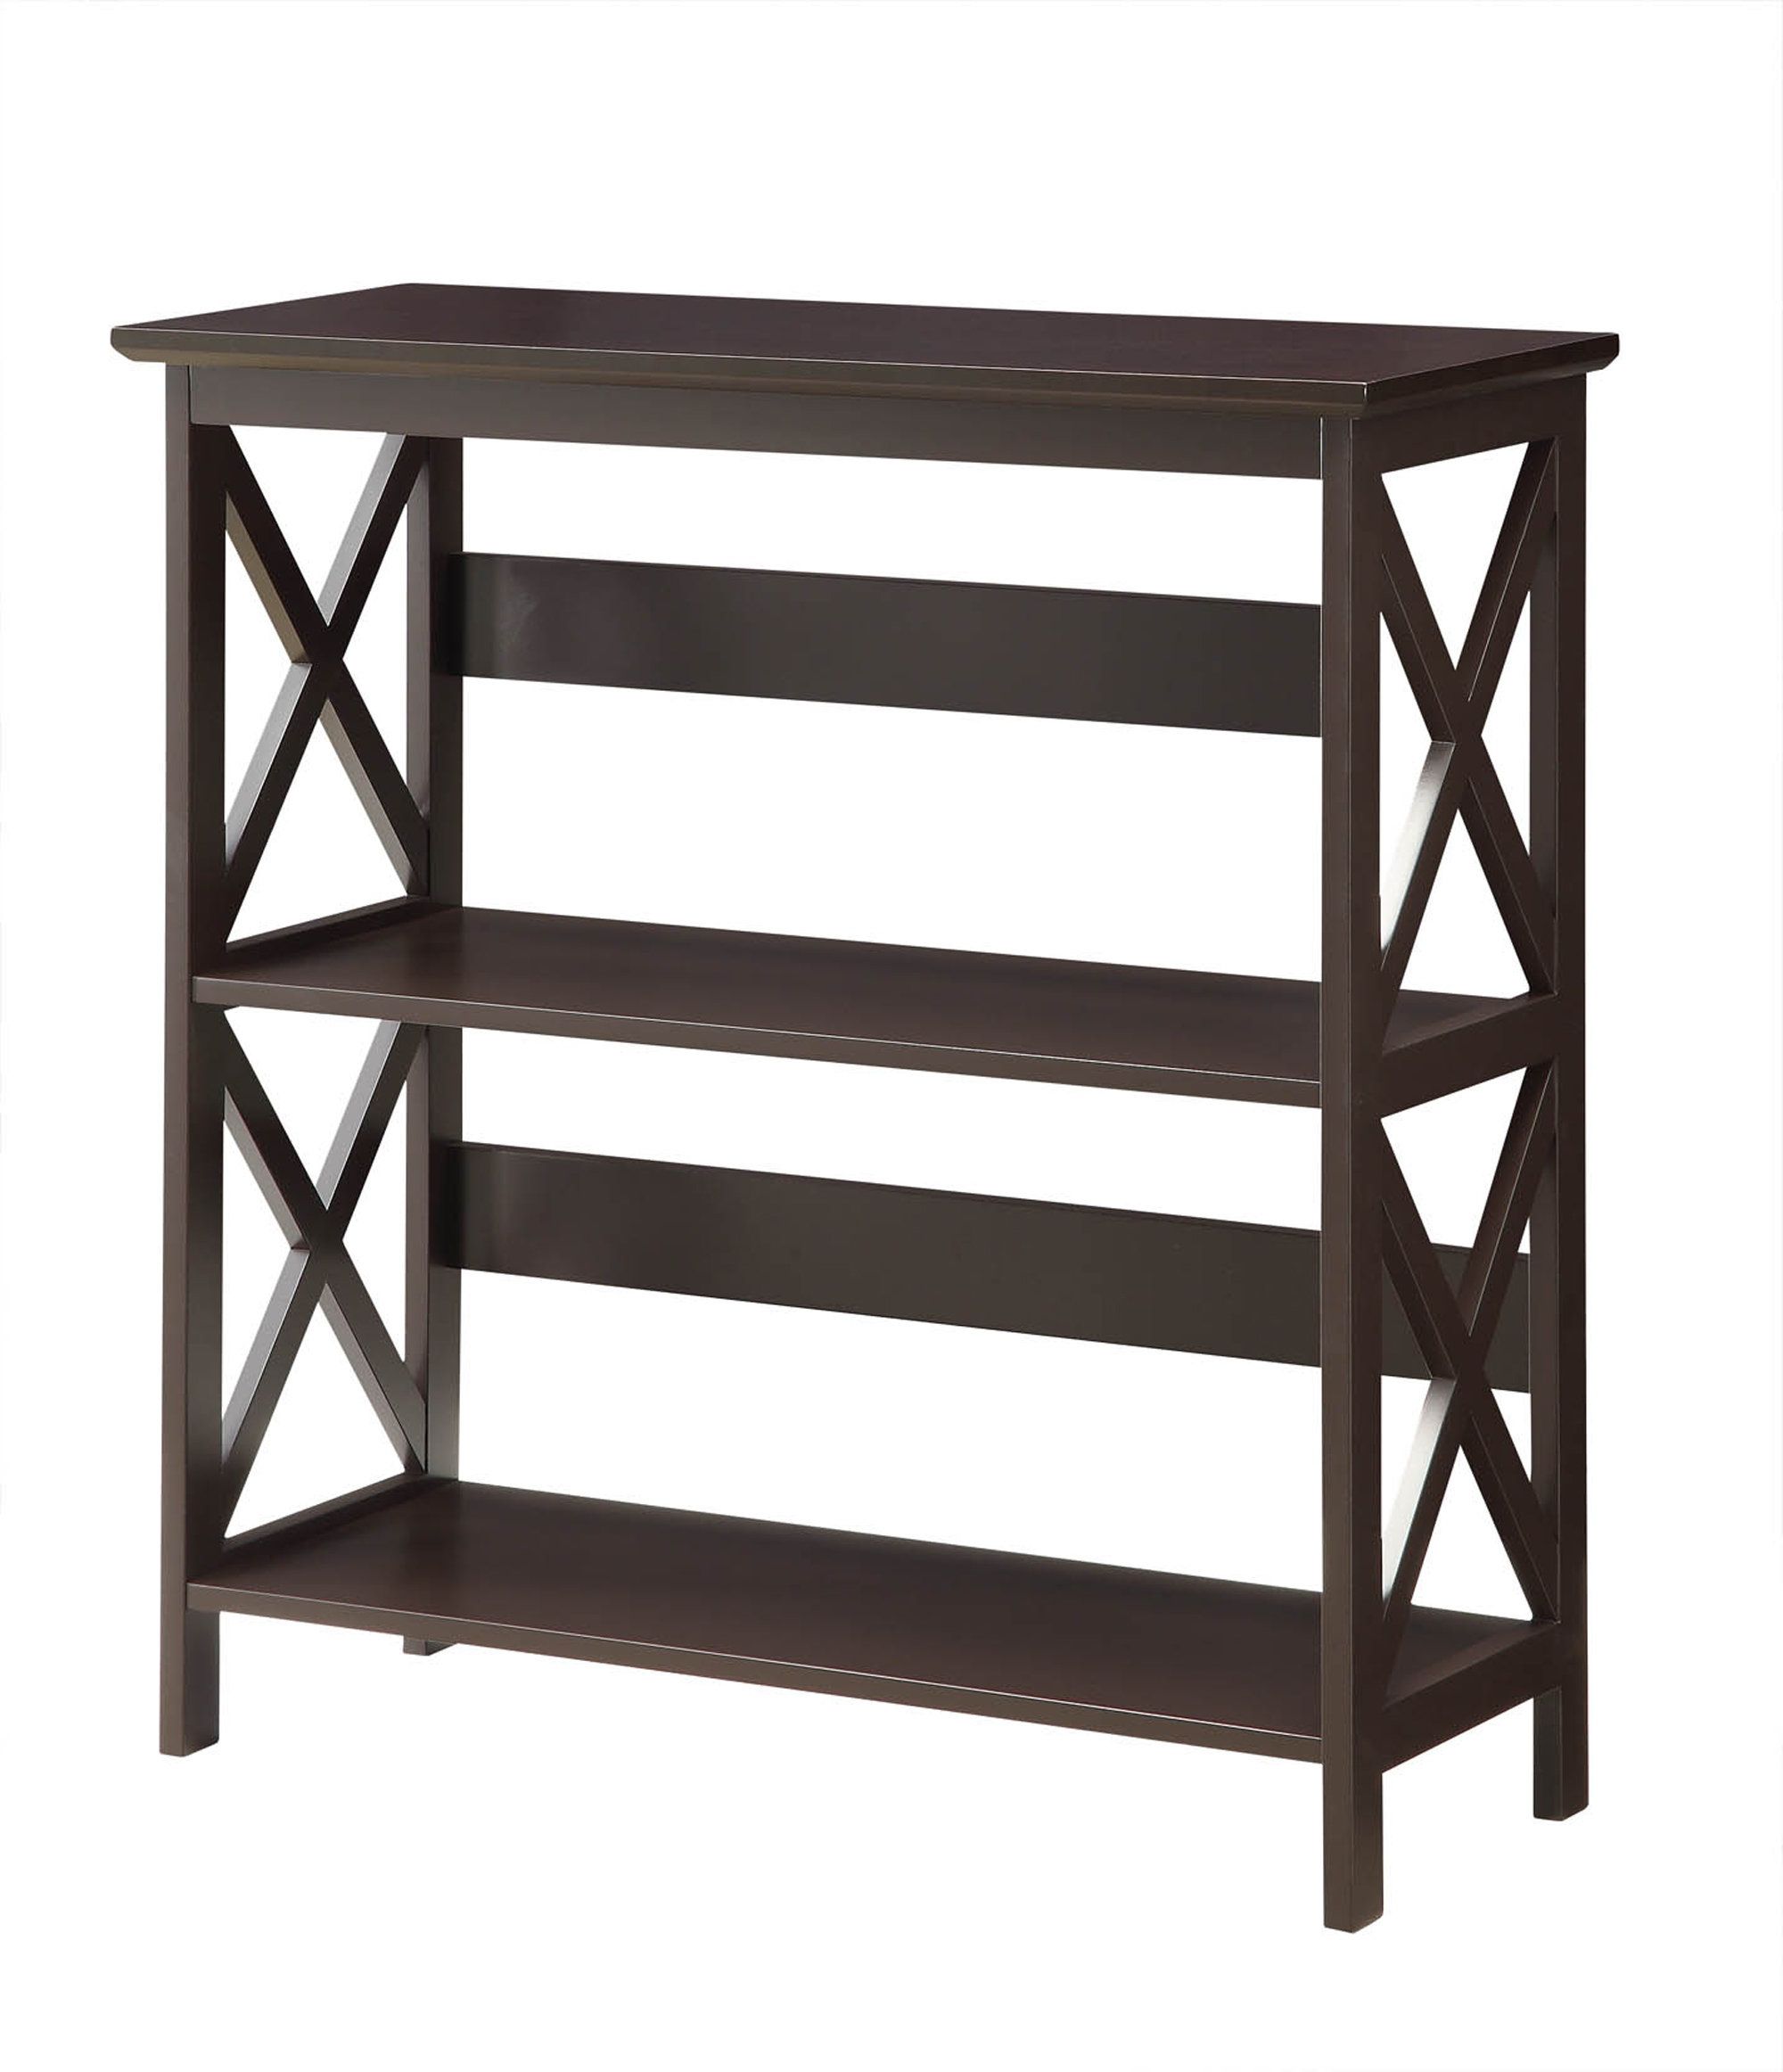 Stoneford Etagere Bookcase Intended For Famous Stoneford Etagere Bookcases (View 12 of 20)